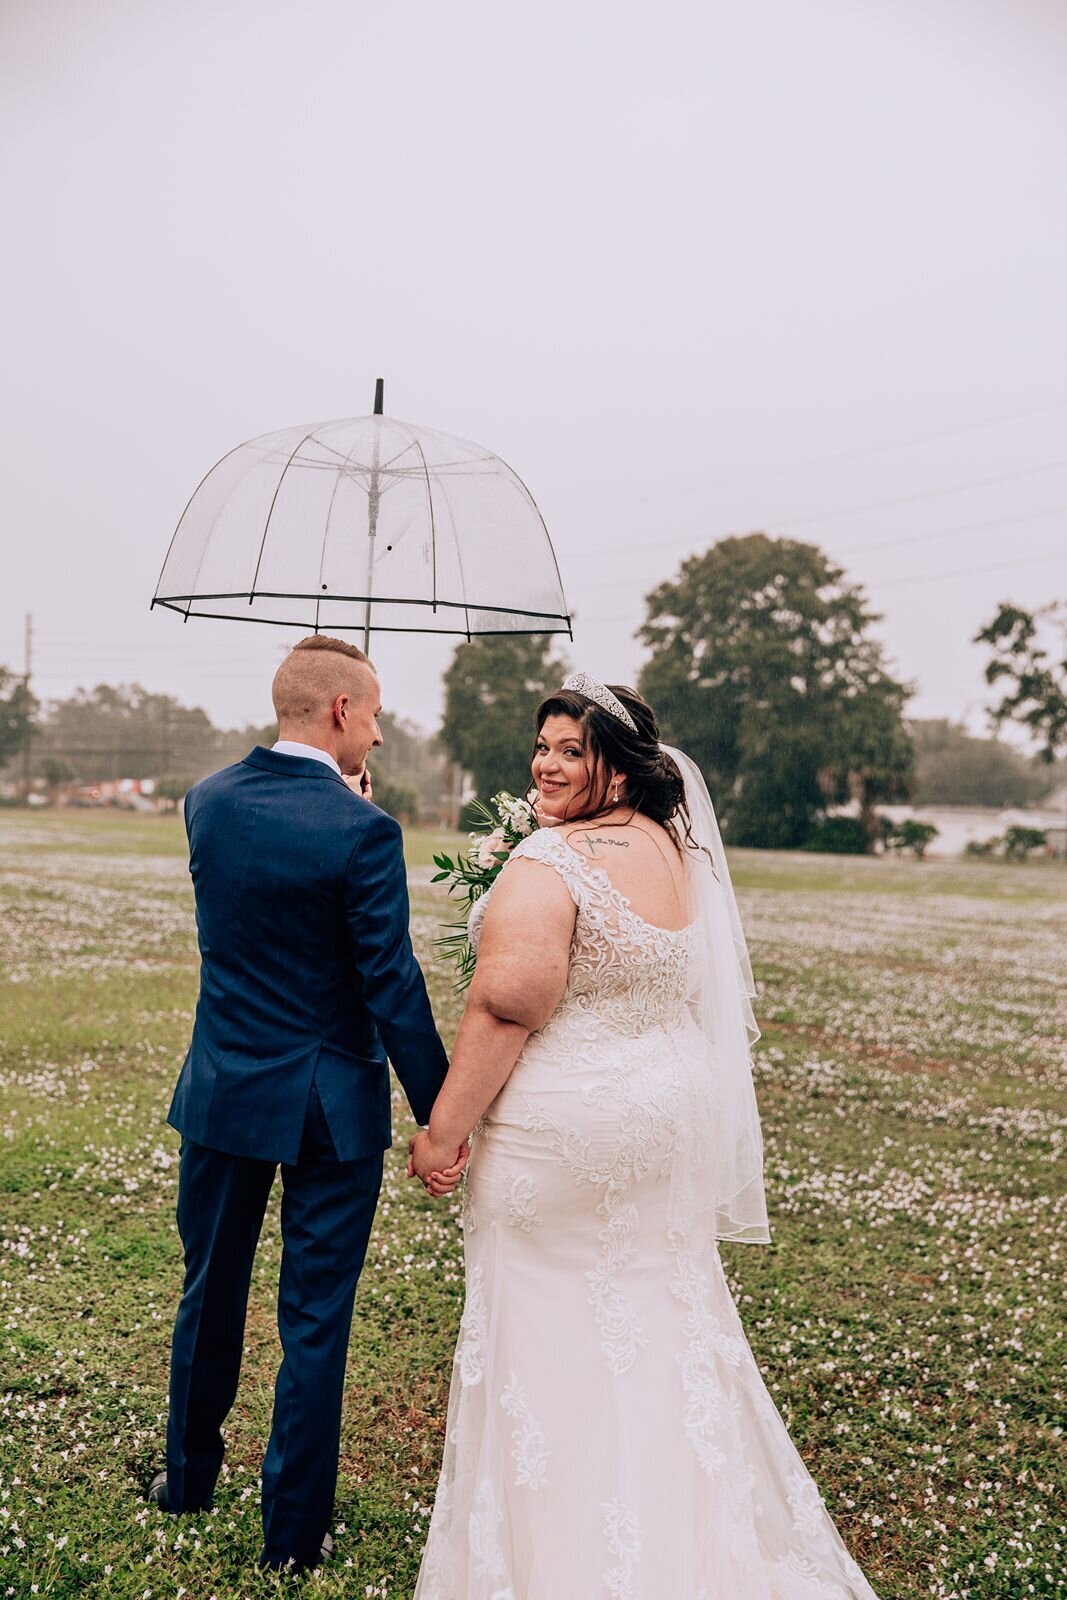 bride and groom walking in the rain with their umbrella